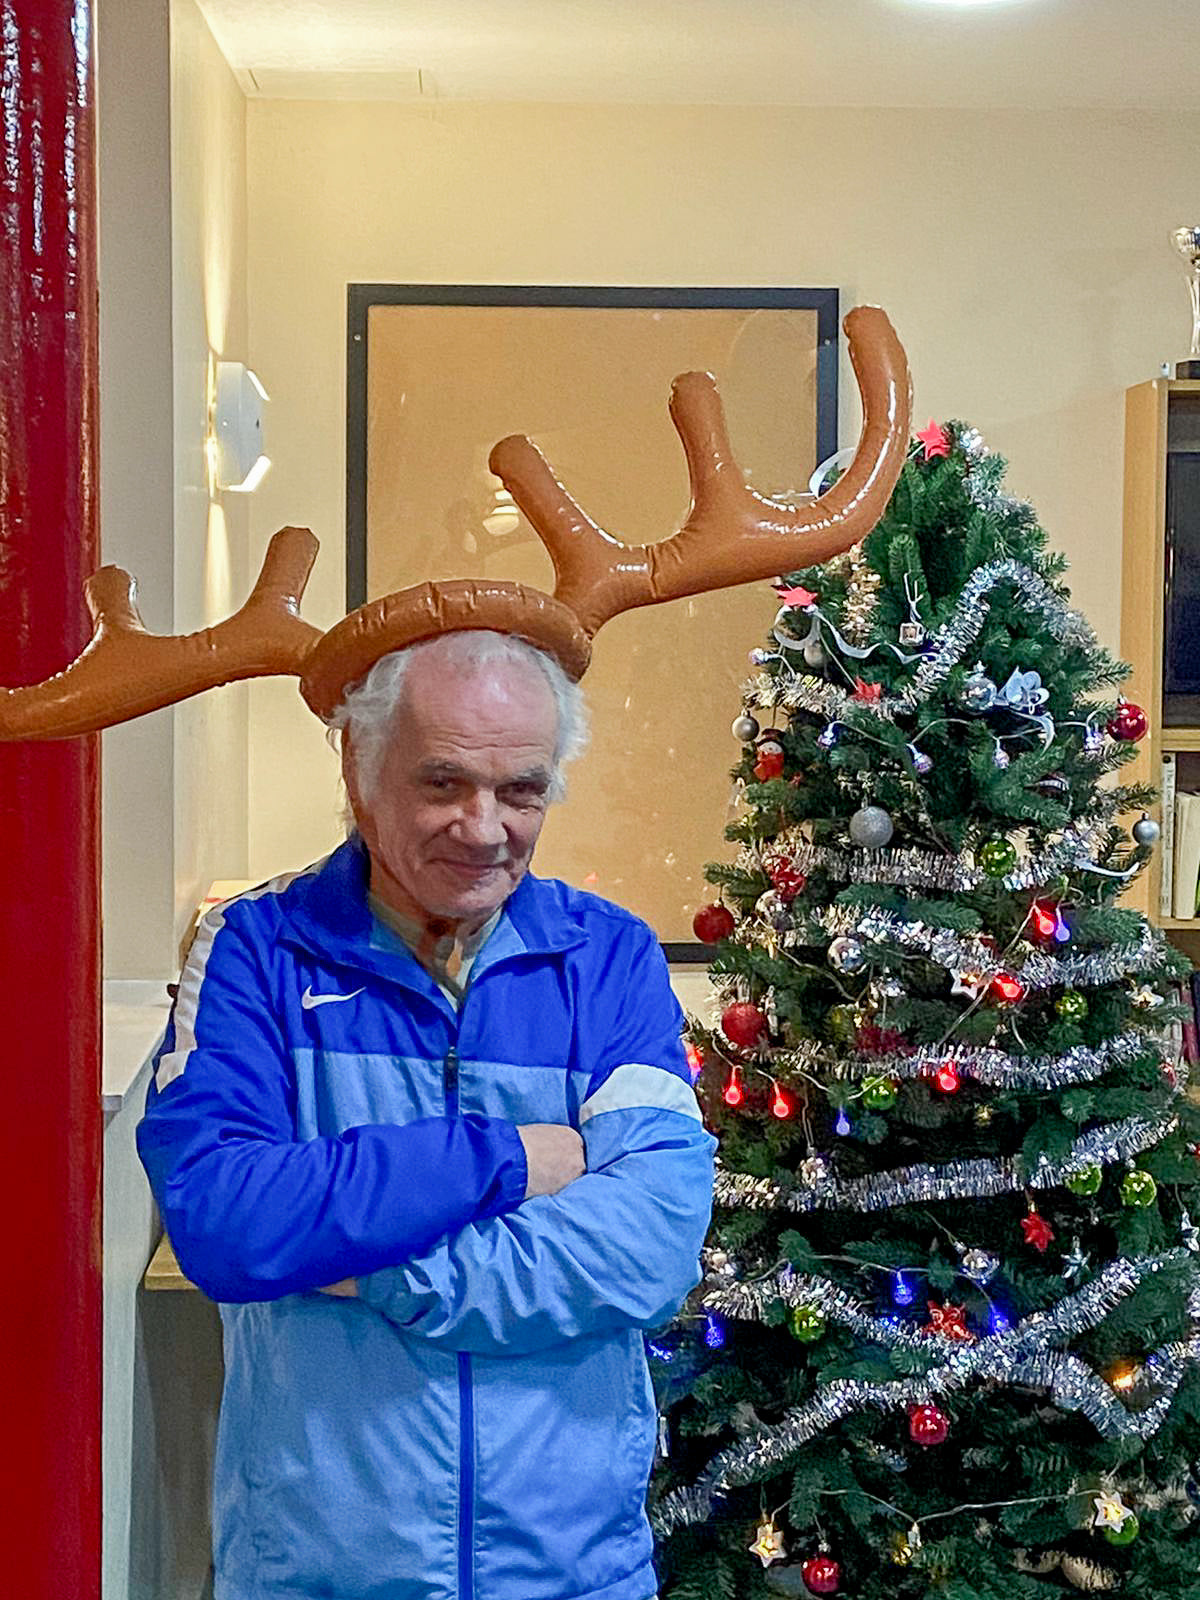 Man with antlers on his head stood next to a Christmas tree.